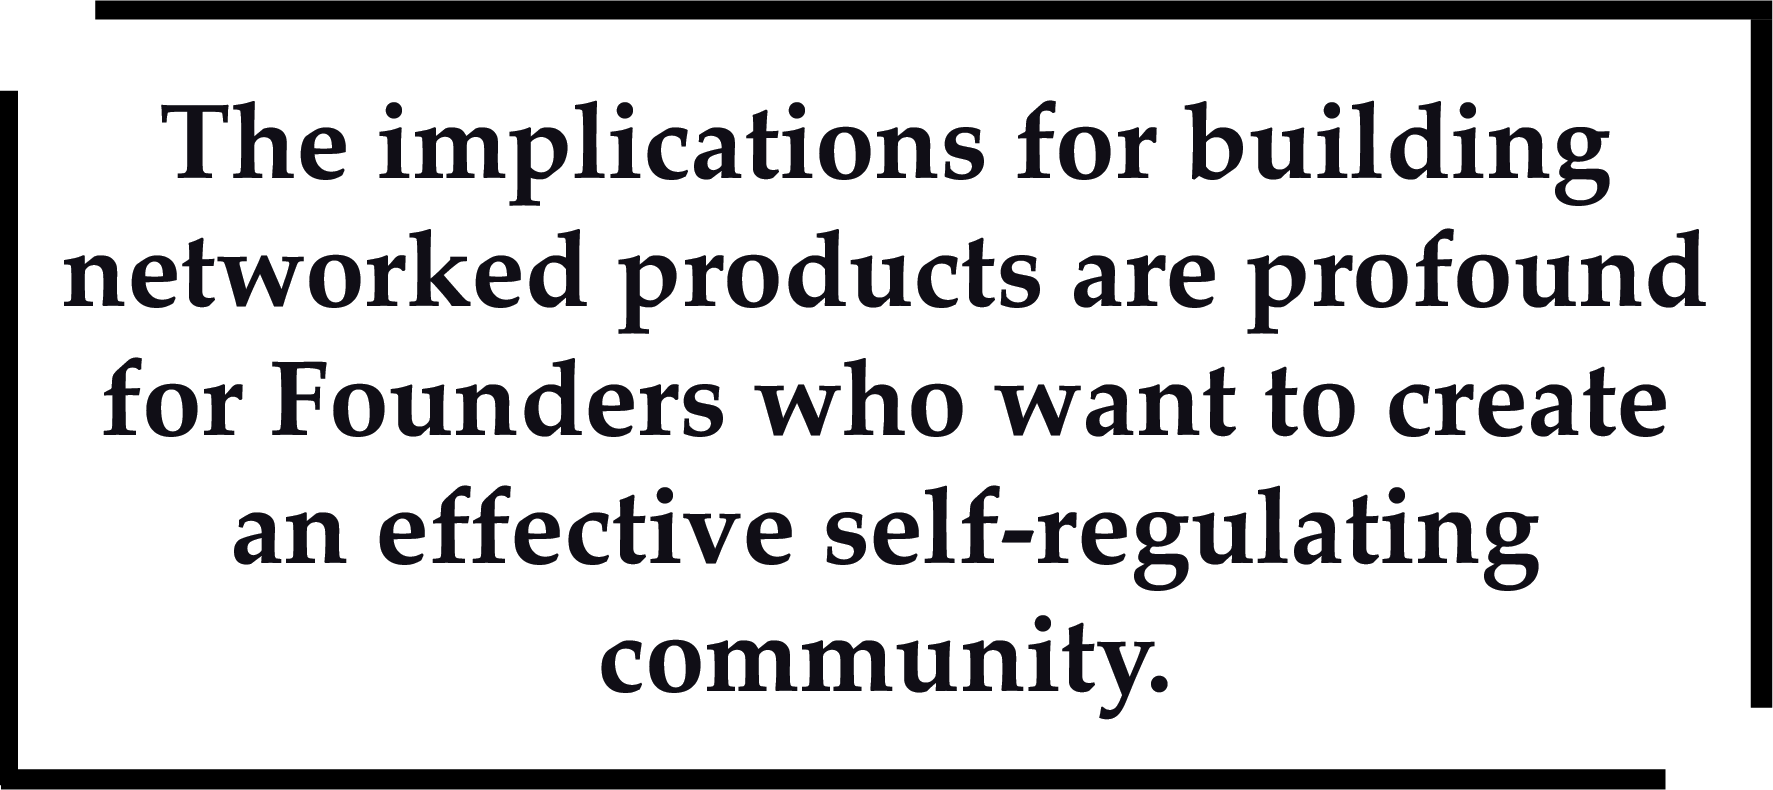 The implications for building networked products are profound for Founders who want to create an effective self-regulating community.